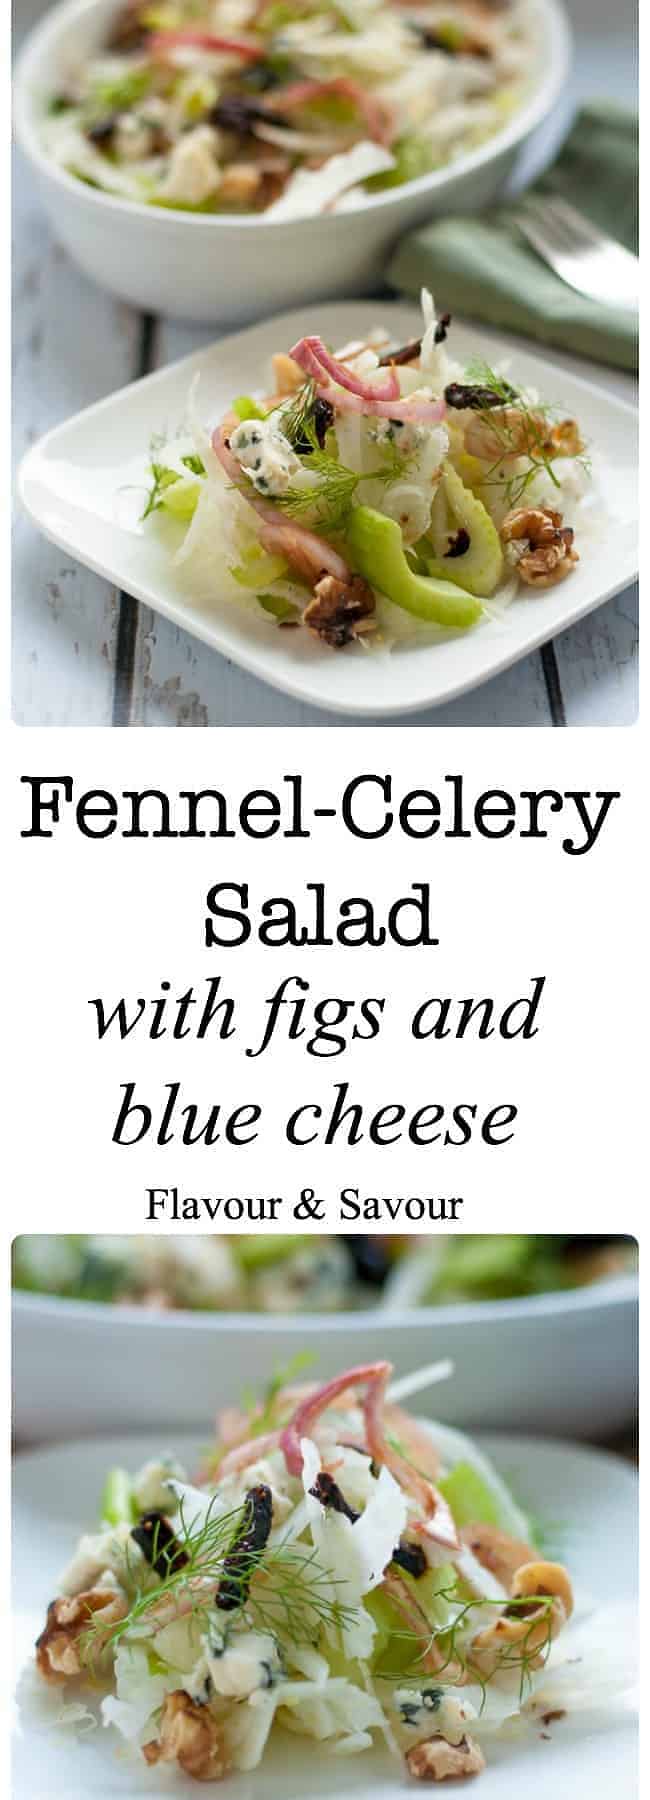 Fennel-Celery Salad with Figs and Blue Cheese.